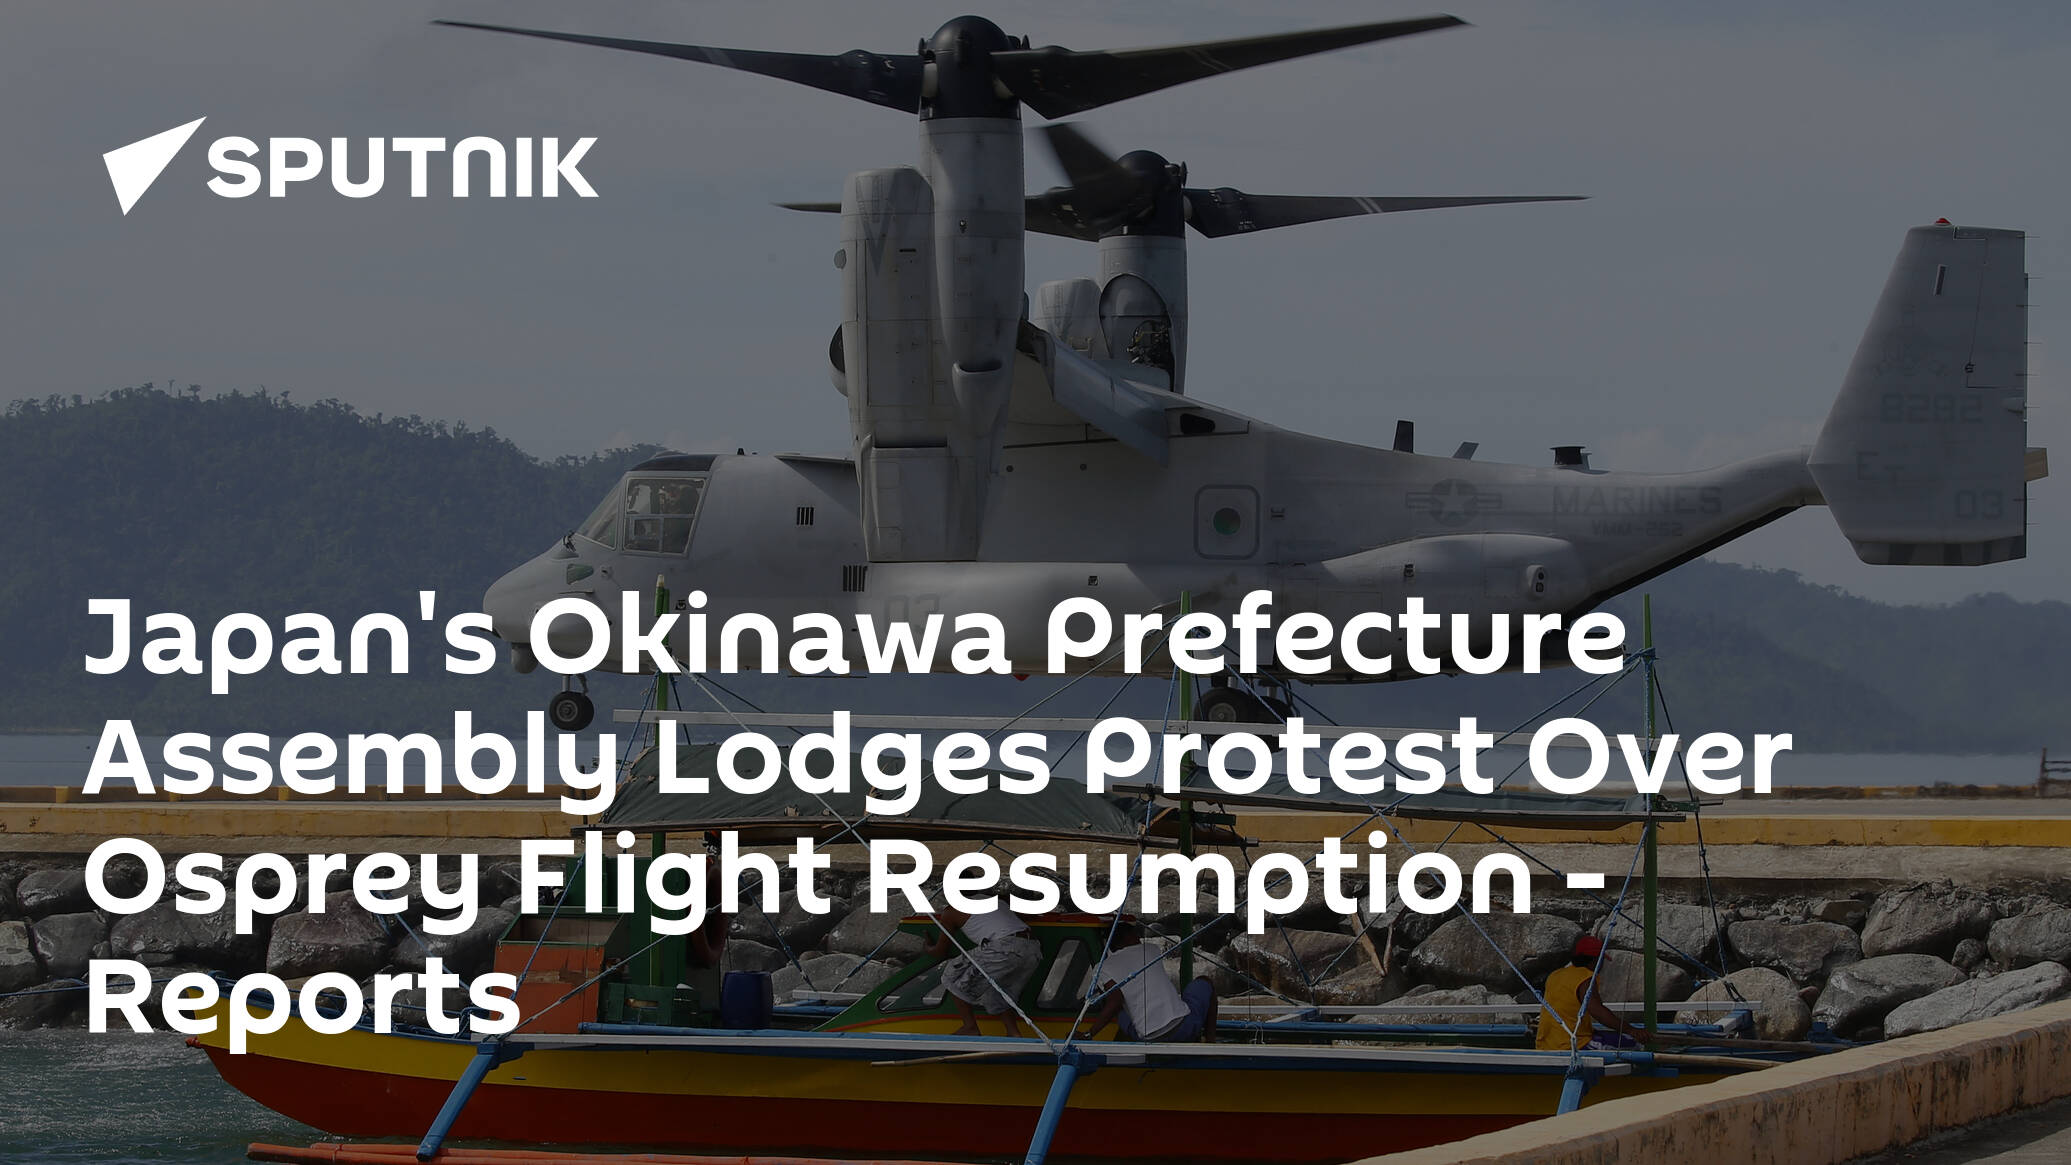 Japan's Okinawa Prefecture Assembly Lodges Protest Over Osprey Flight Resumption – Reports